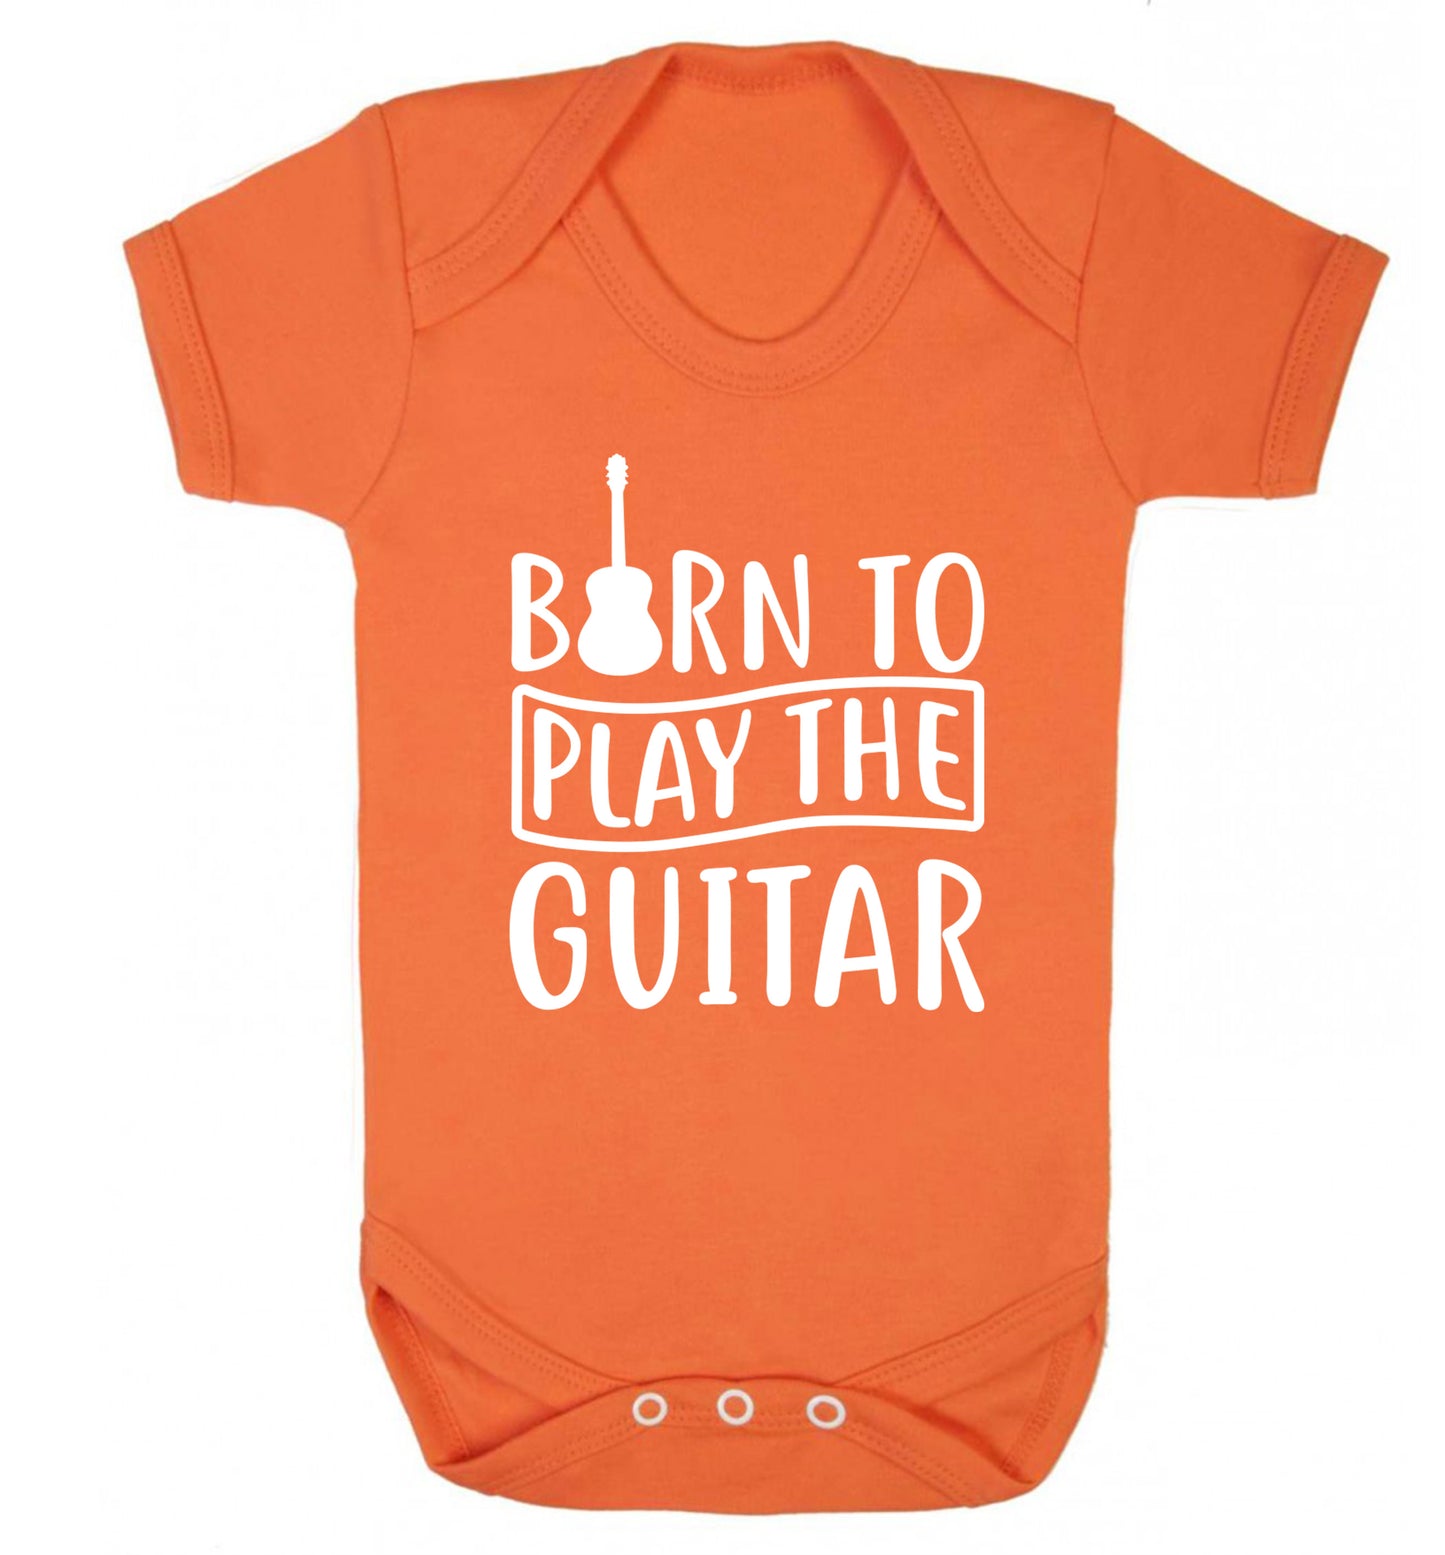 Born to play the guitar Baby Vest orange 18-24 months